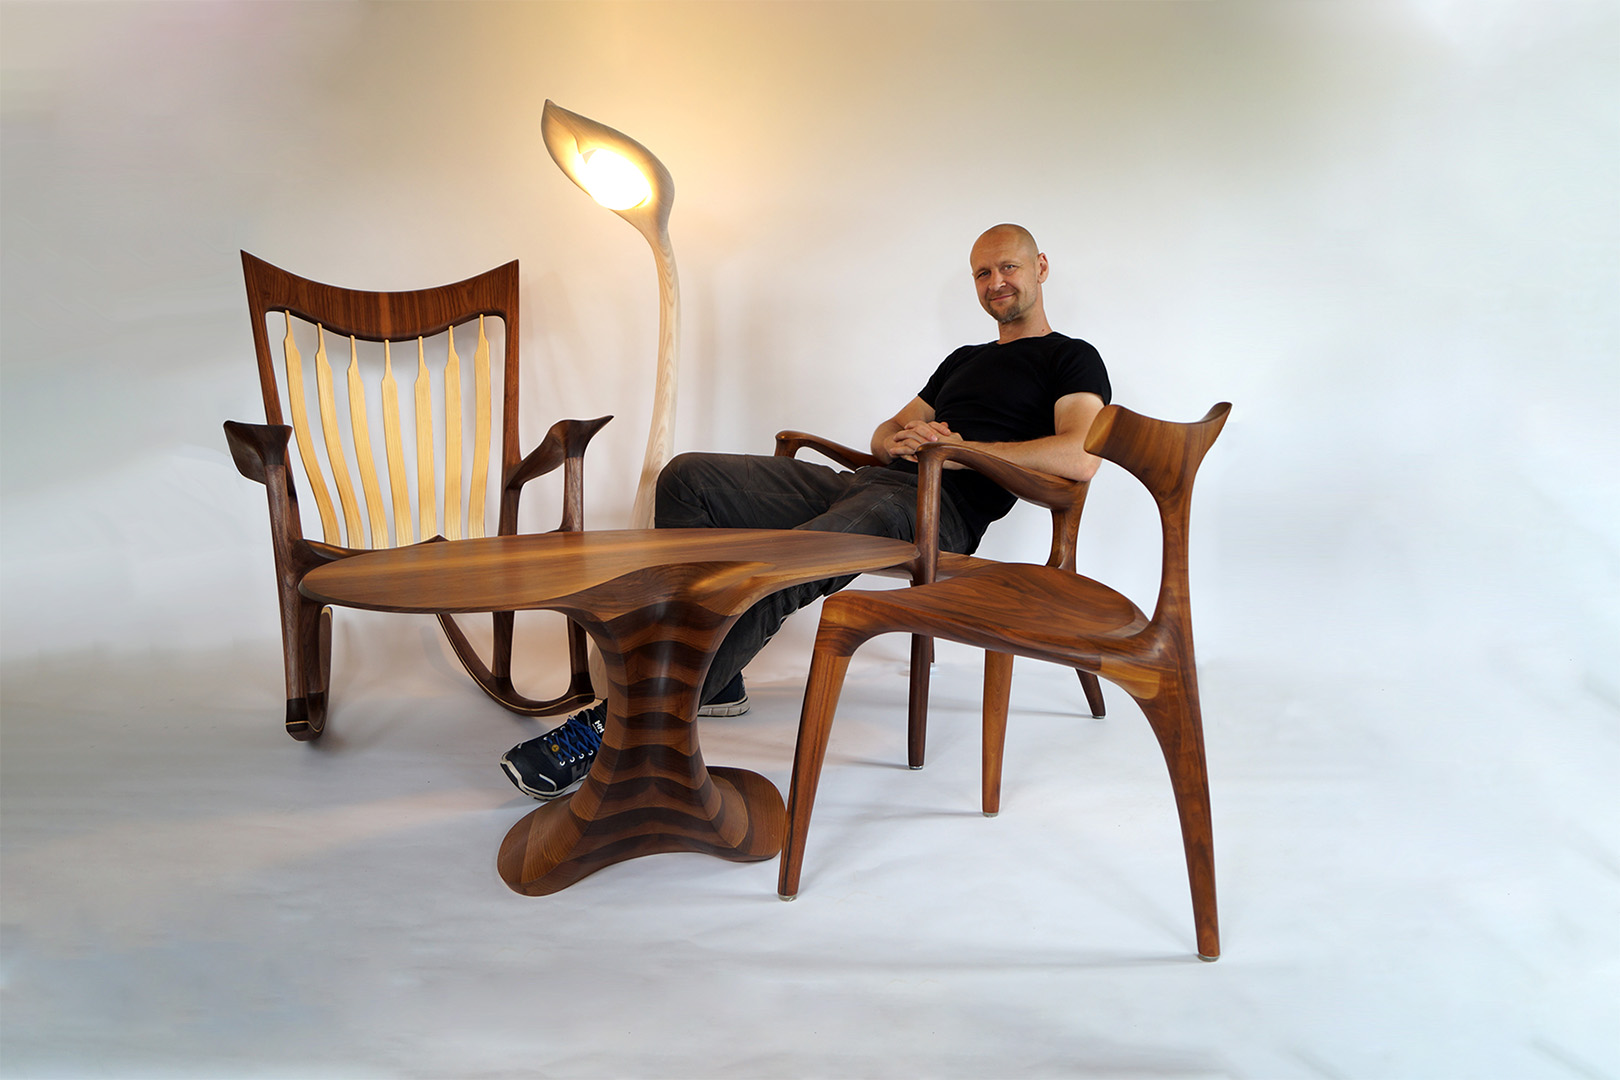 Morten with some of his most popular pieces: the American-inspired Low Rocker, the Low Back Lounge Chair and the Triplex Dining Chair, accompanied by the Sunflower light and his Columnae table.